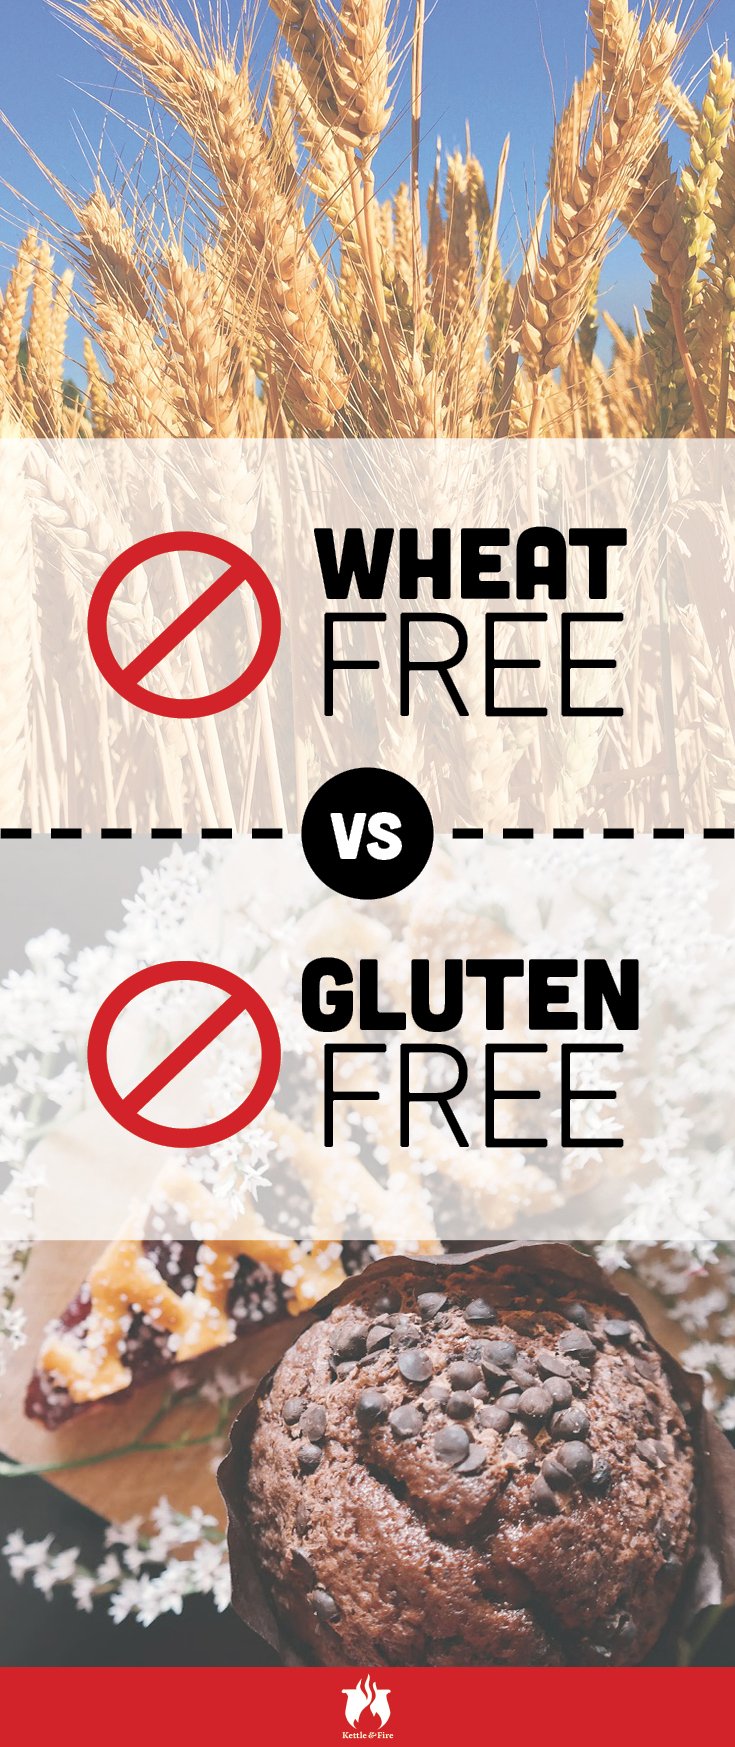 Ever confused about gluten free vs. wheat free? We've laid out the difference for you.